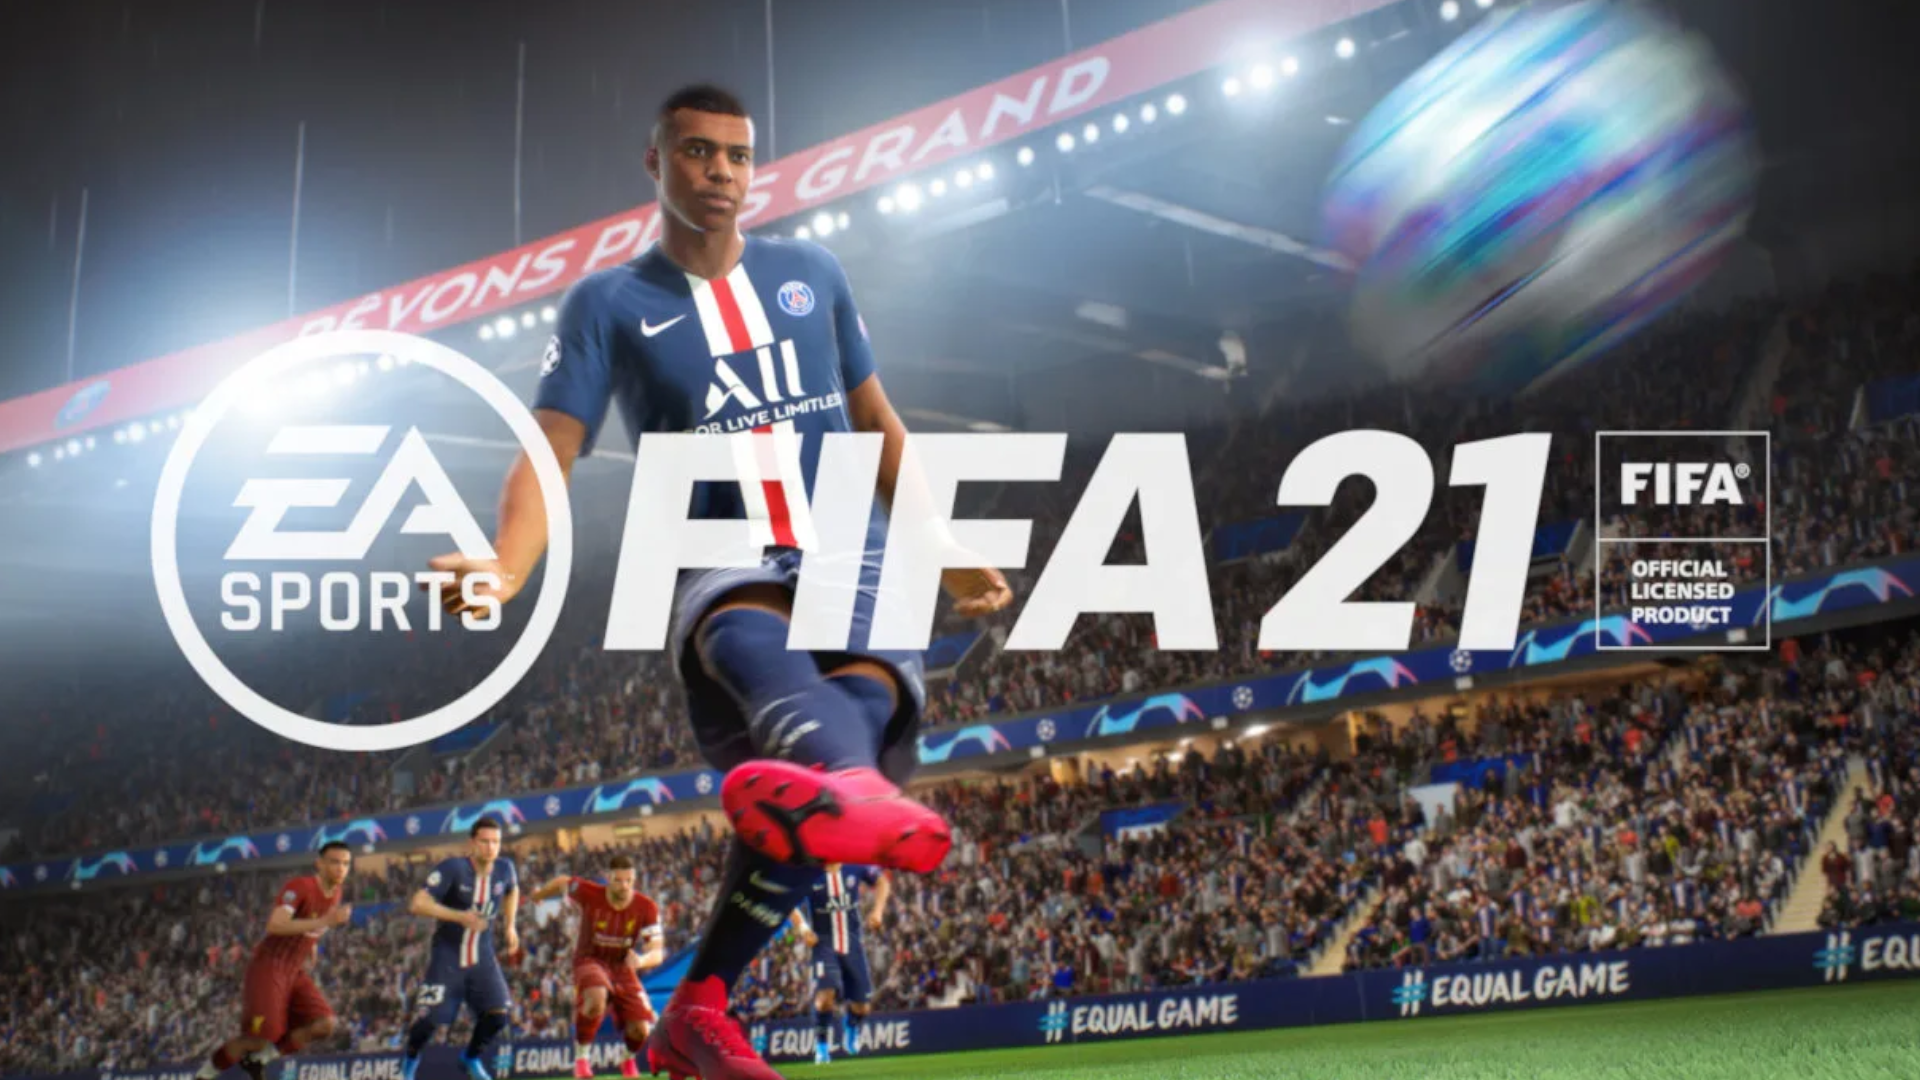 FIFA 21 launches on Google Stadia in March - 9to5Google